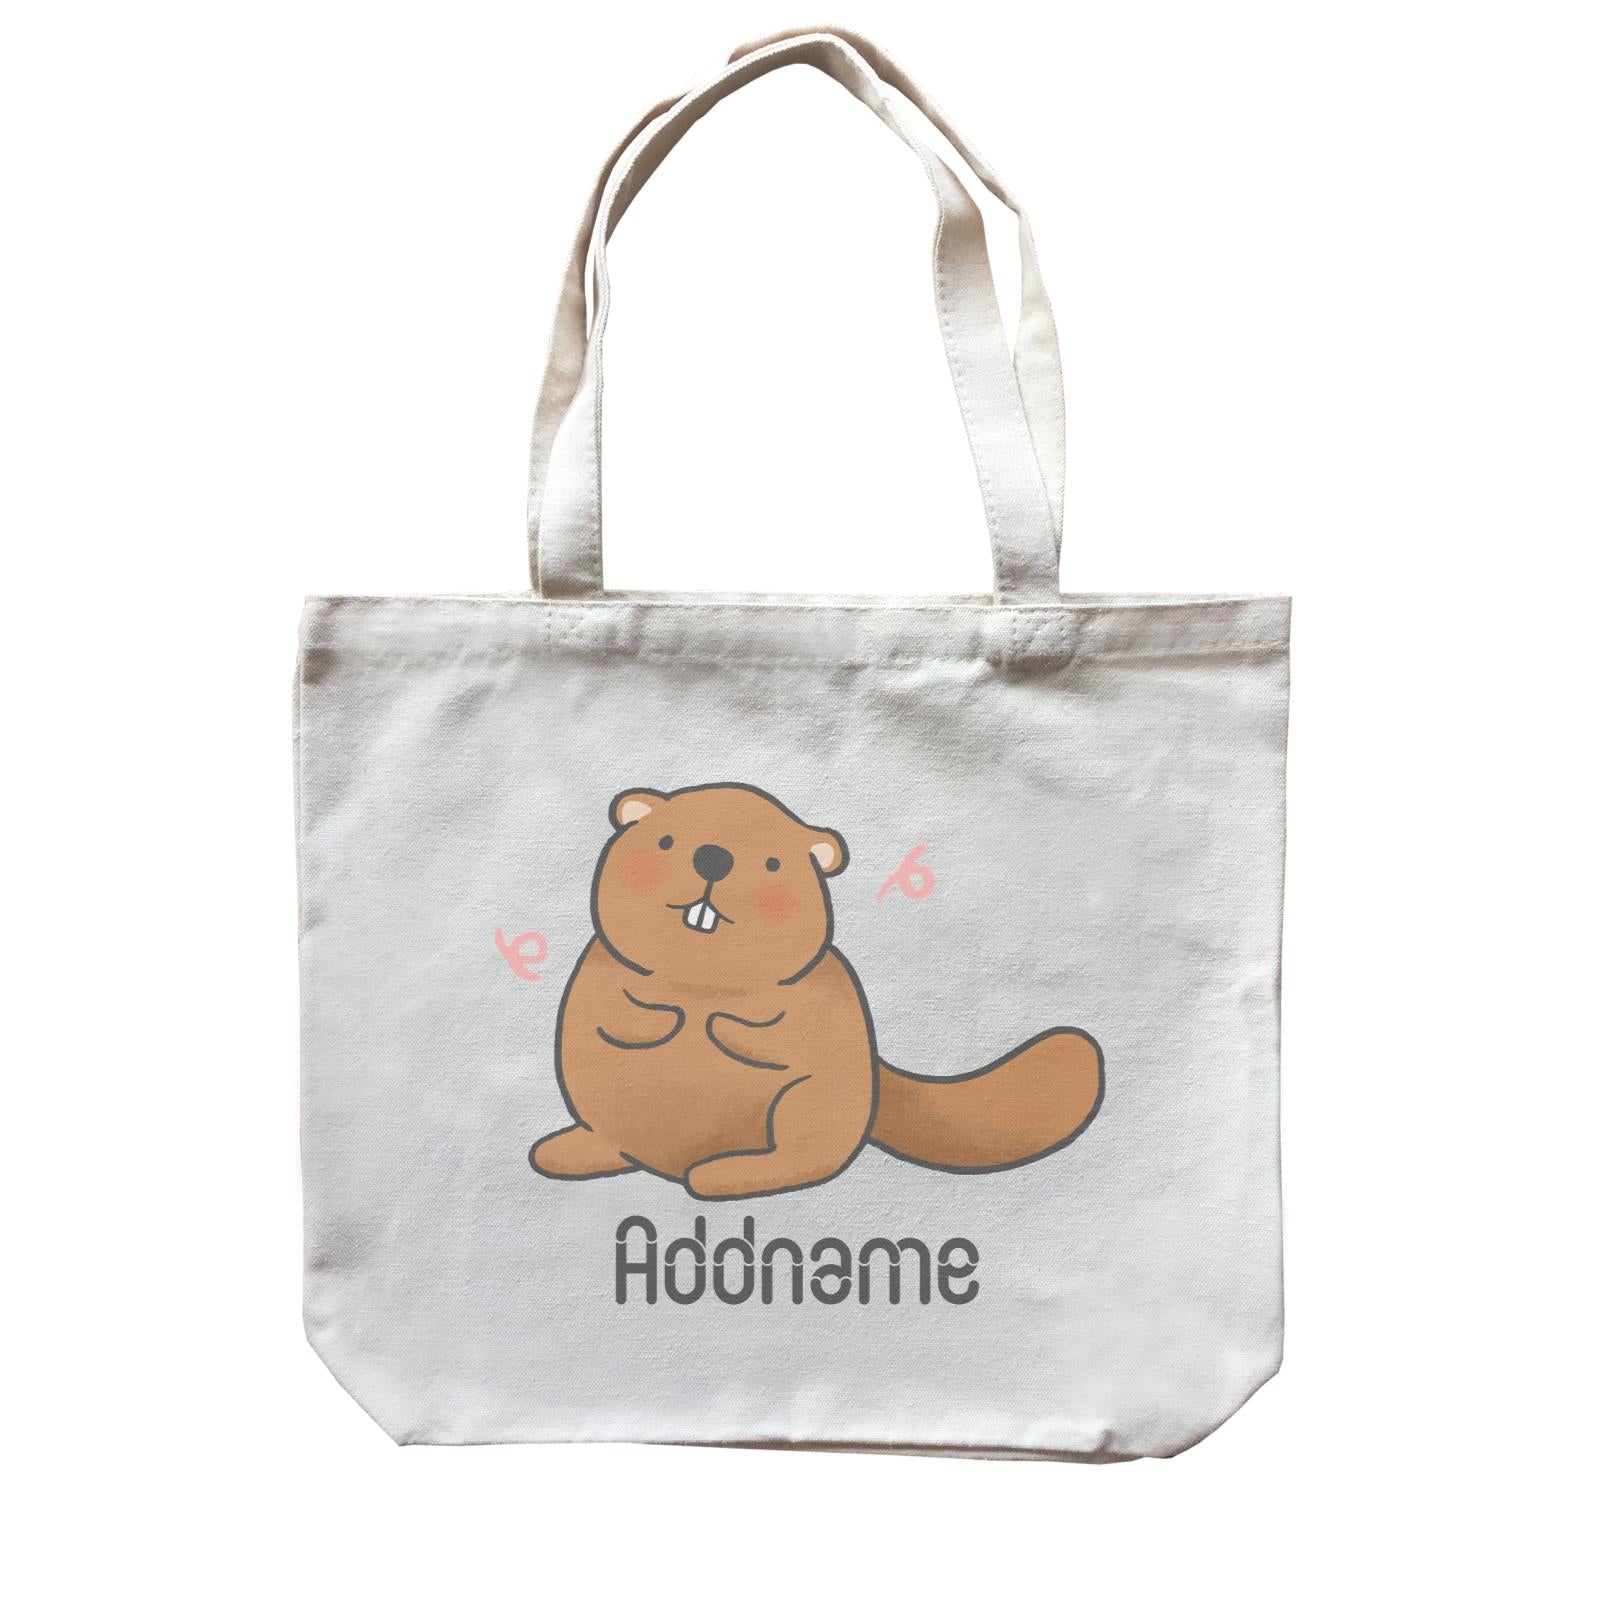 Cute Hand Drawn Style Beaver Addname Canvas Bag